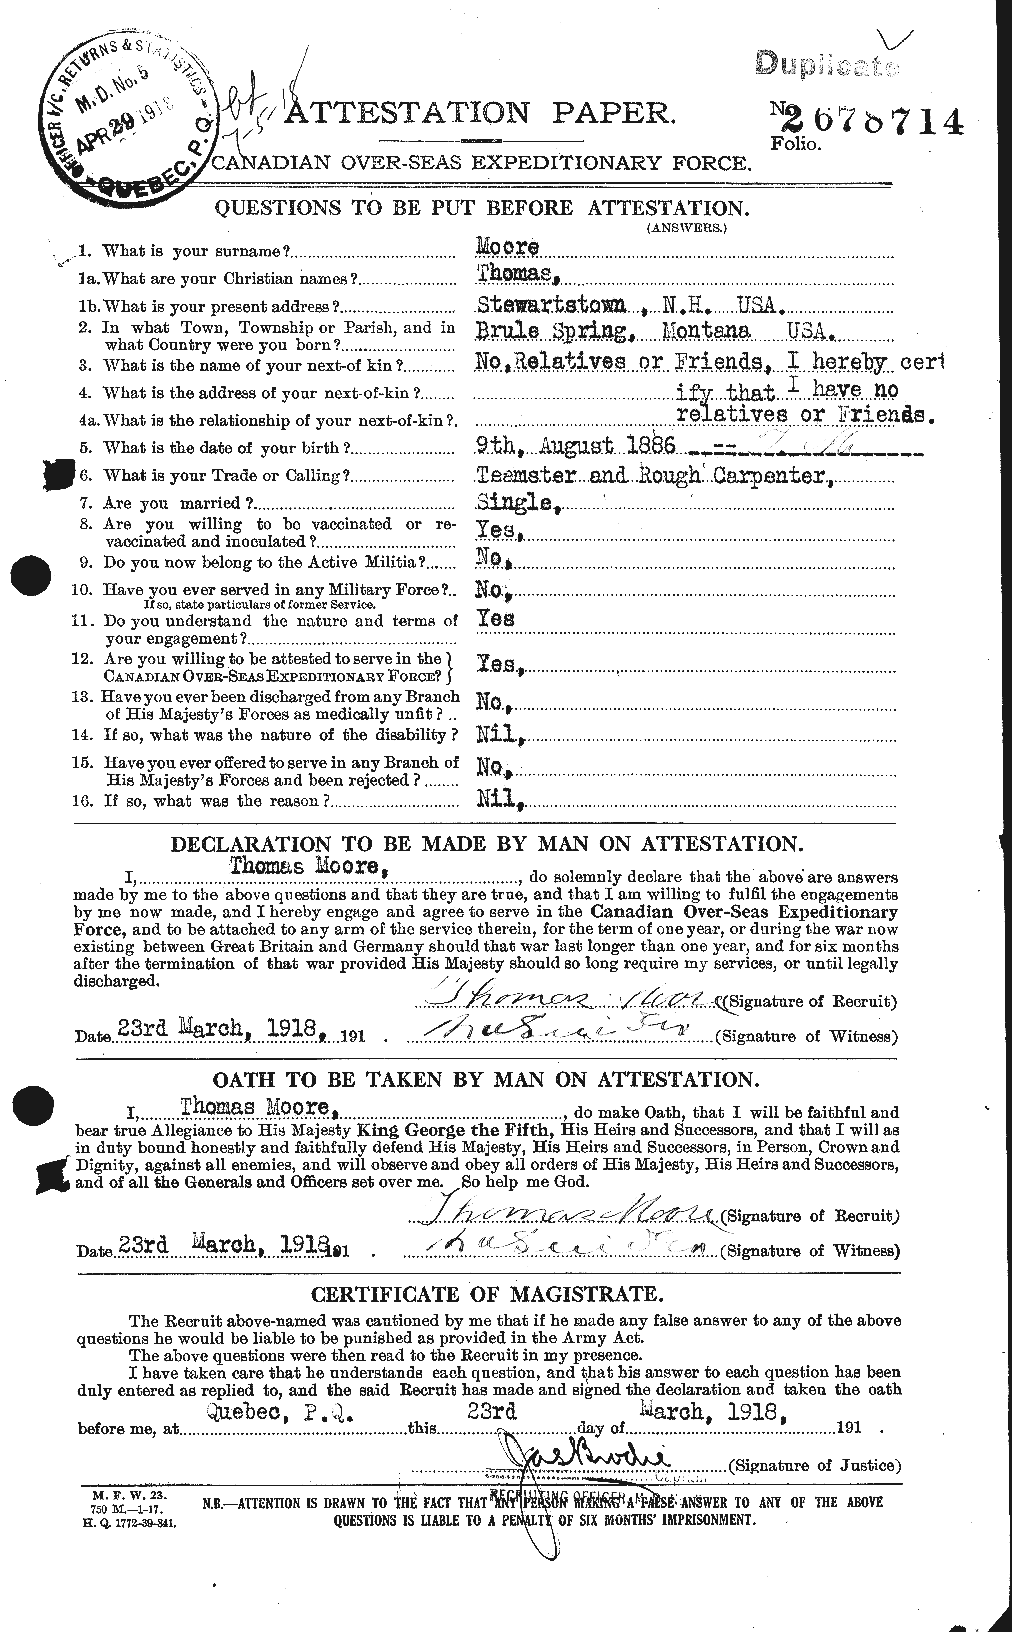 Personnel Records of the First World War - CEF 505616a